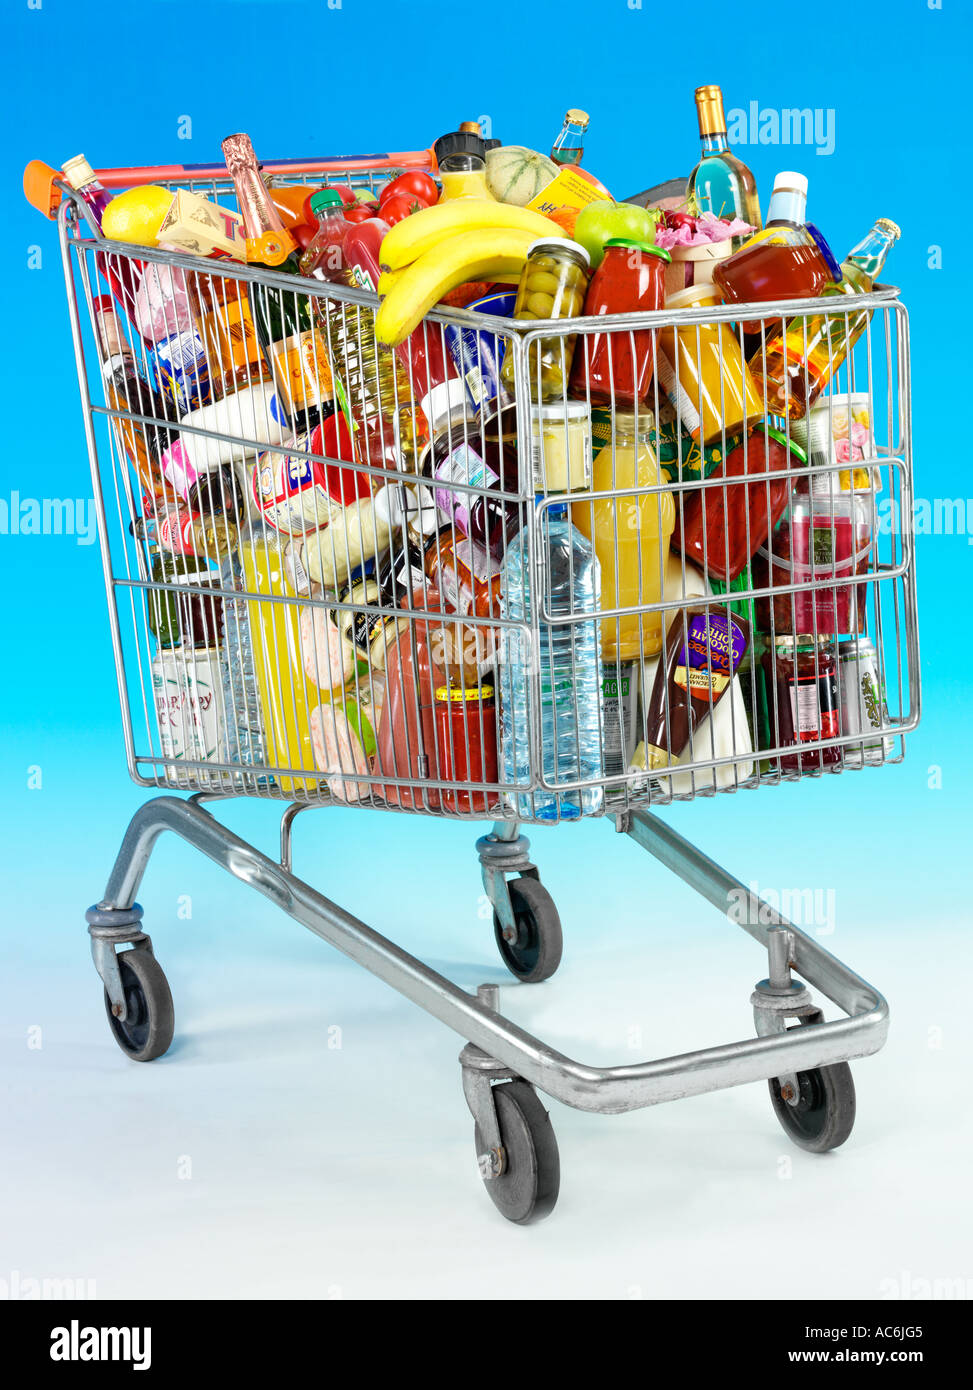 SHOPPING TROLLEY / GROCERY CART Stock Photo